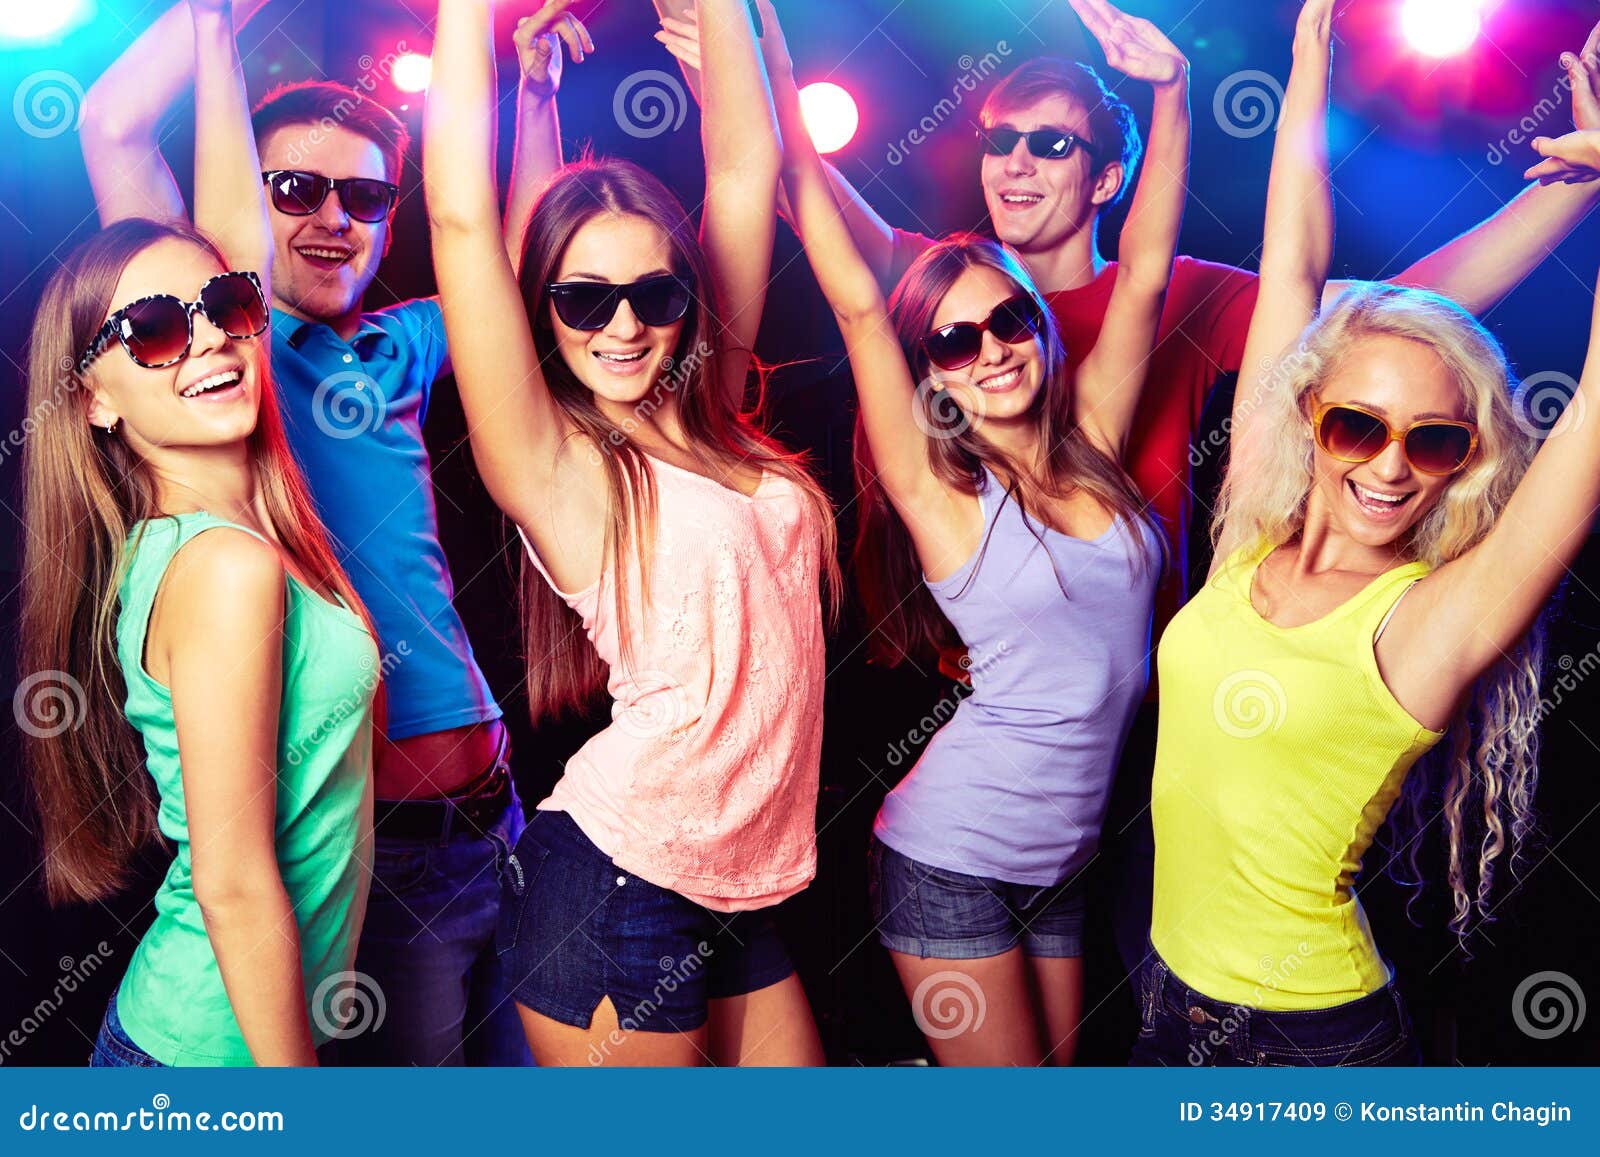 Young people at party. stock image. Image of celebration - 34917409